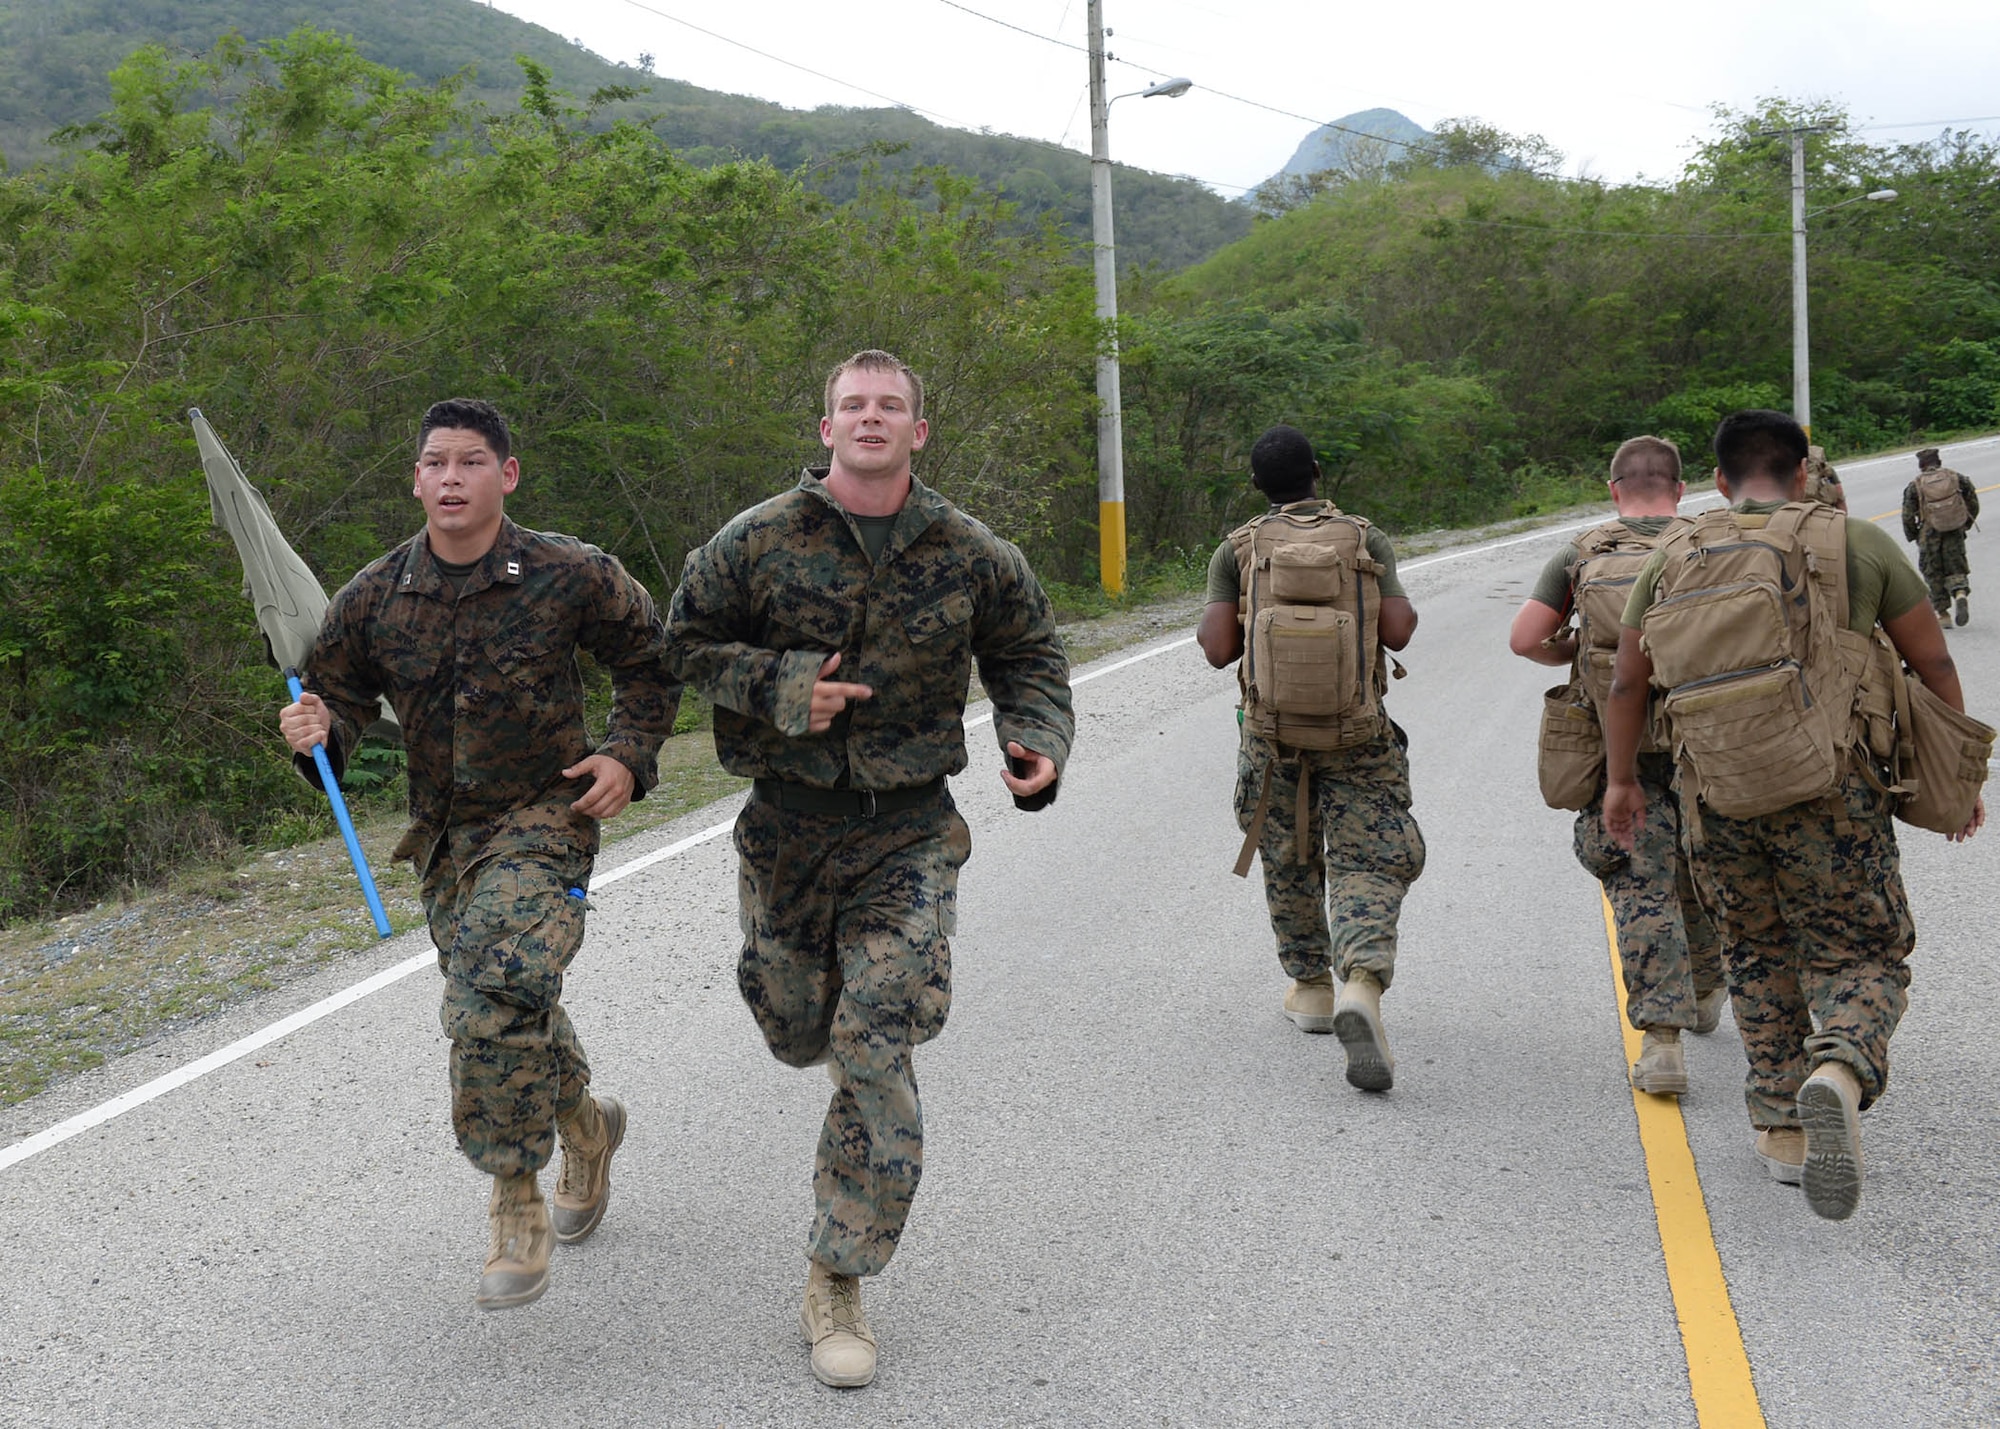 U.S. service members participate in the Sexual Assault Prevention and Response 5K Ruck March in Arroyo Cano, Dominican Republic, April 9, 2017. Statistically, most sexual assaults begin as sexual harassment and then escalate. (U.S. Air Force photo by Staff Sgt. Timothy M. Young)